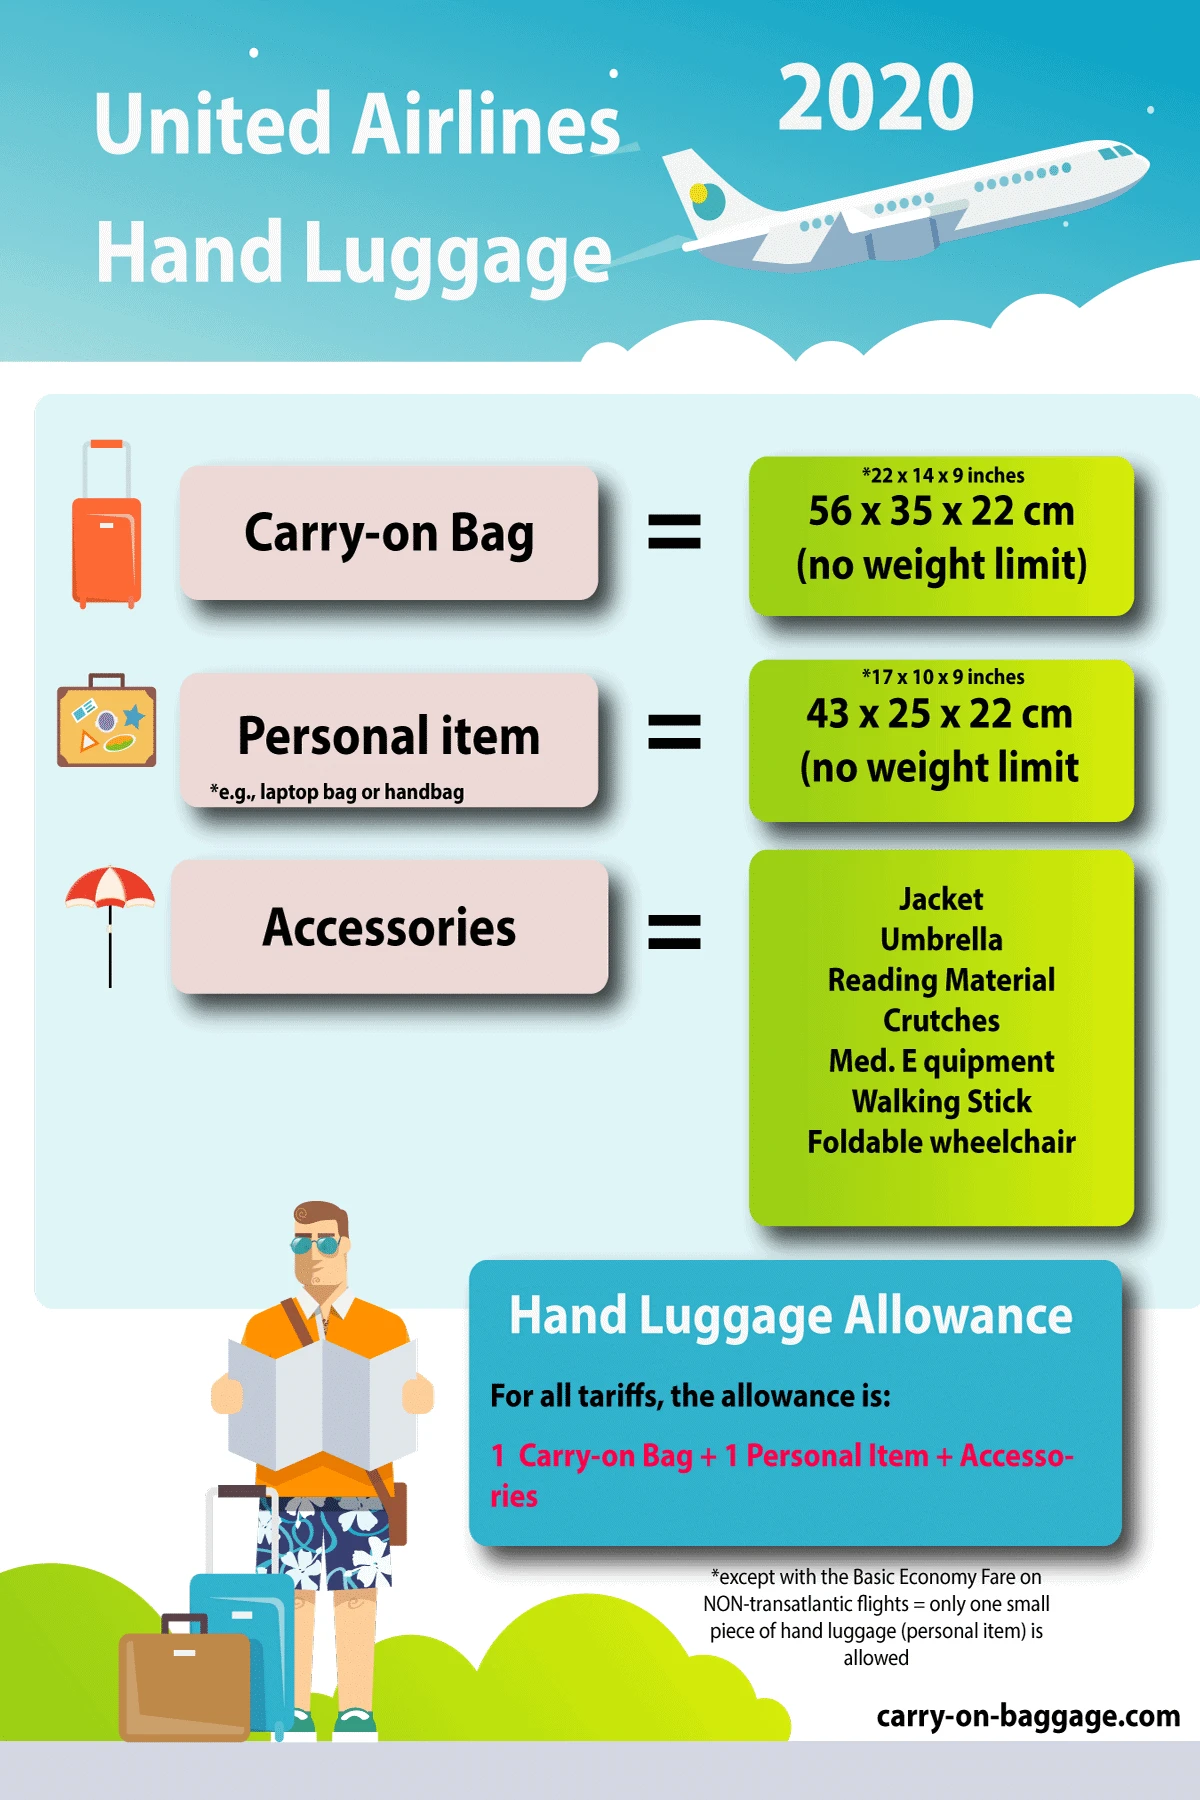 United Airlines Hand Luggage Allowance 2020